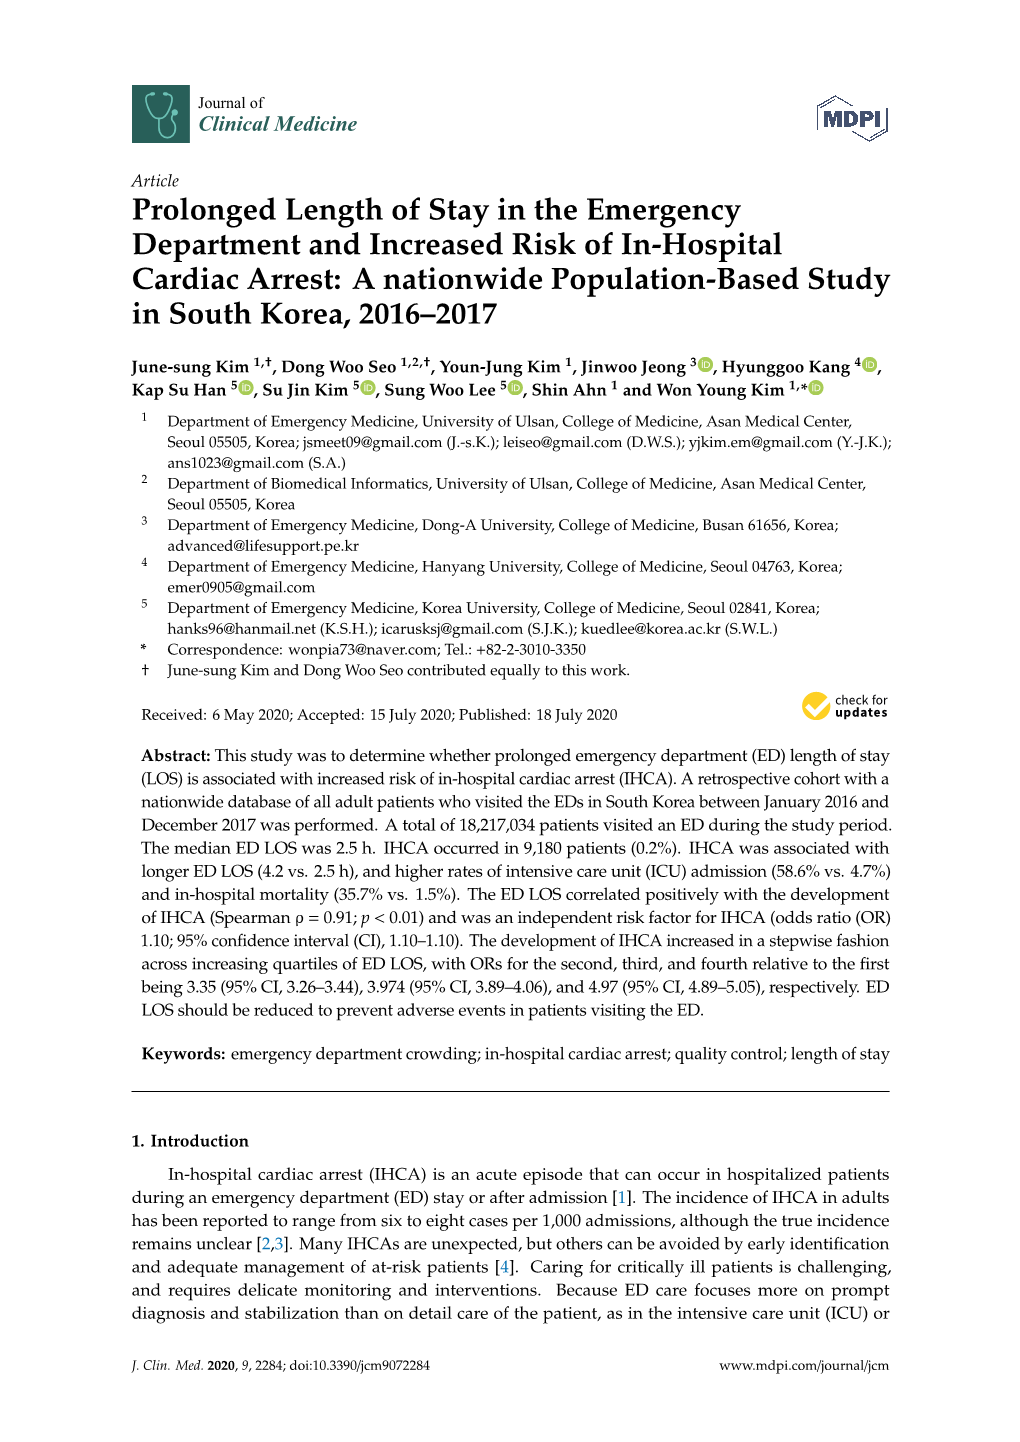 Prolonged Length of Stay in the Emergency Department and Increased Risk of In-Hospital Cardiac Arrest: a Nationwide Population-Based Study in South Korea, 2016–2017